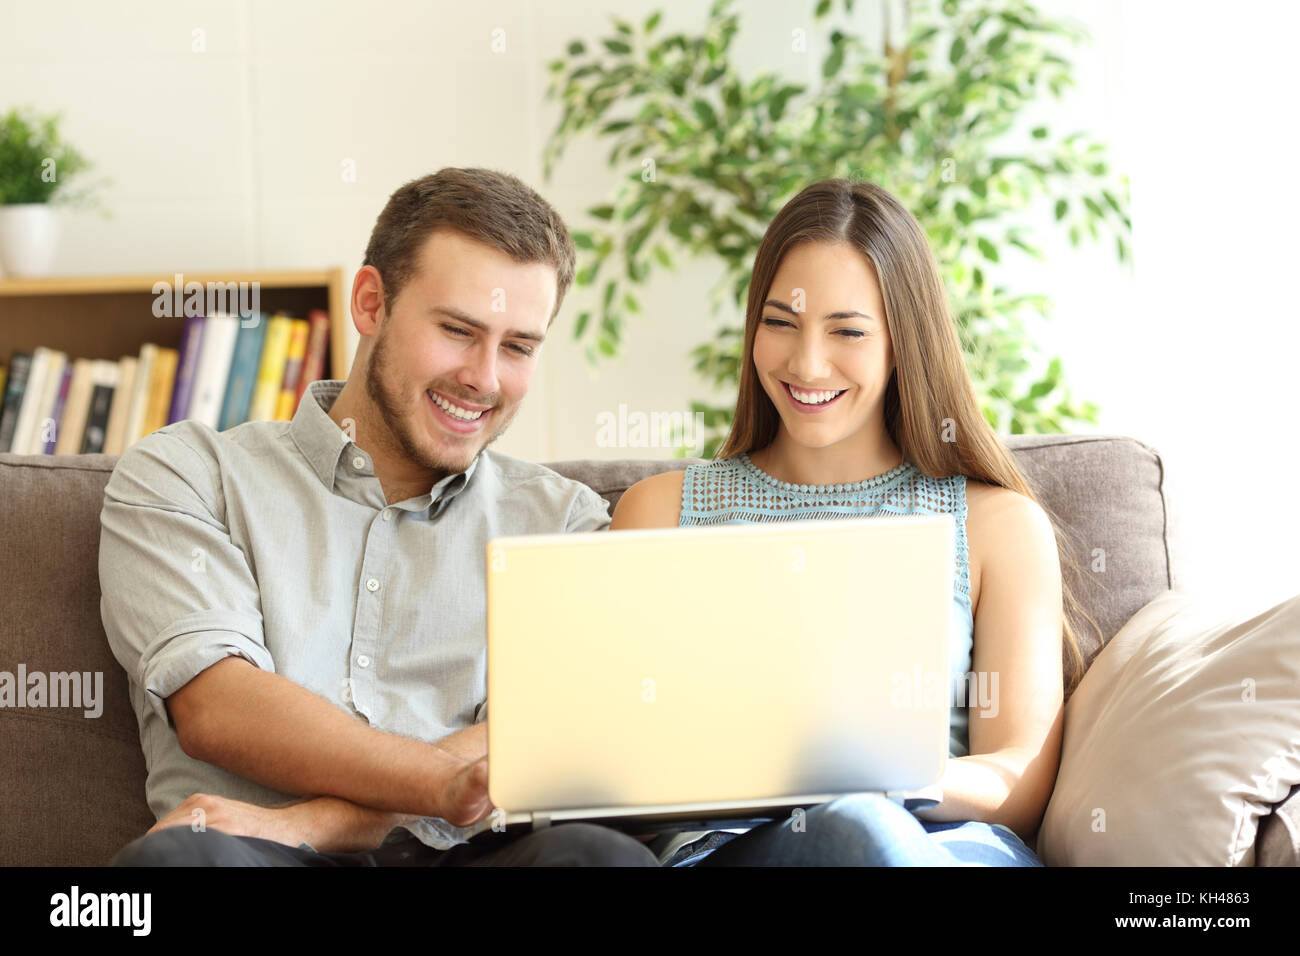 Front view portrait of a young happy couple using a laptop together sitting on a sofa in the living room at home Stock Photo